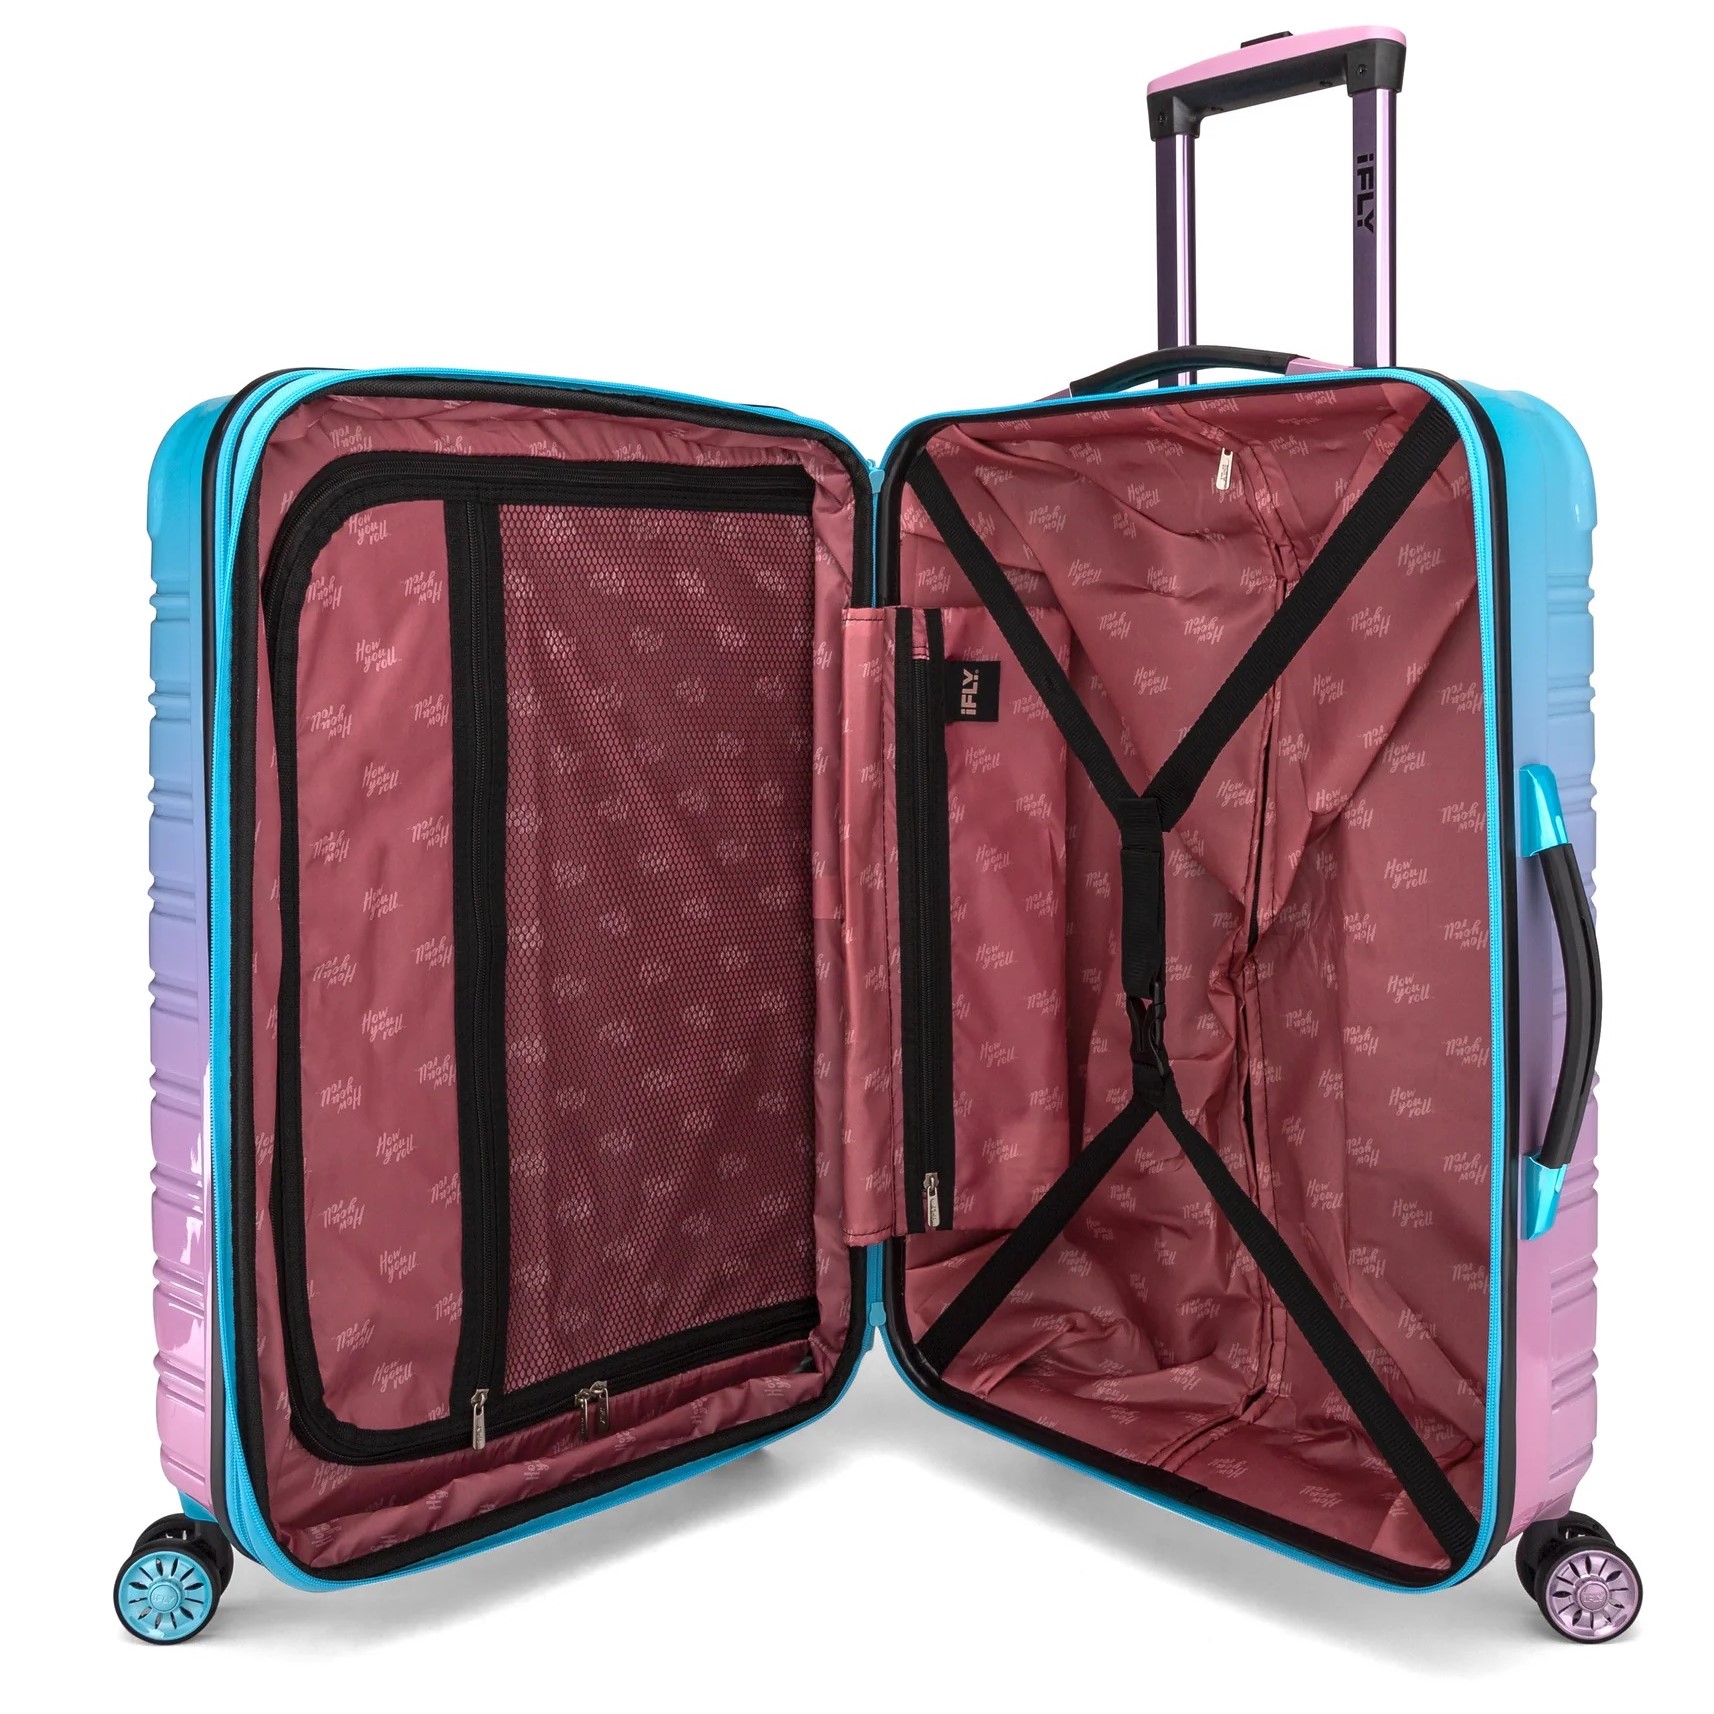 VALI DU LỊCH IFLY FIBERTECH OMBRE HARDSIDE LUGGAGE IN COTTON CANDY 15